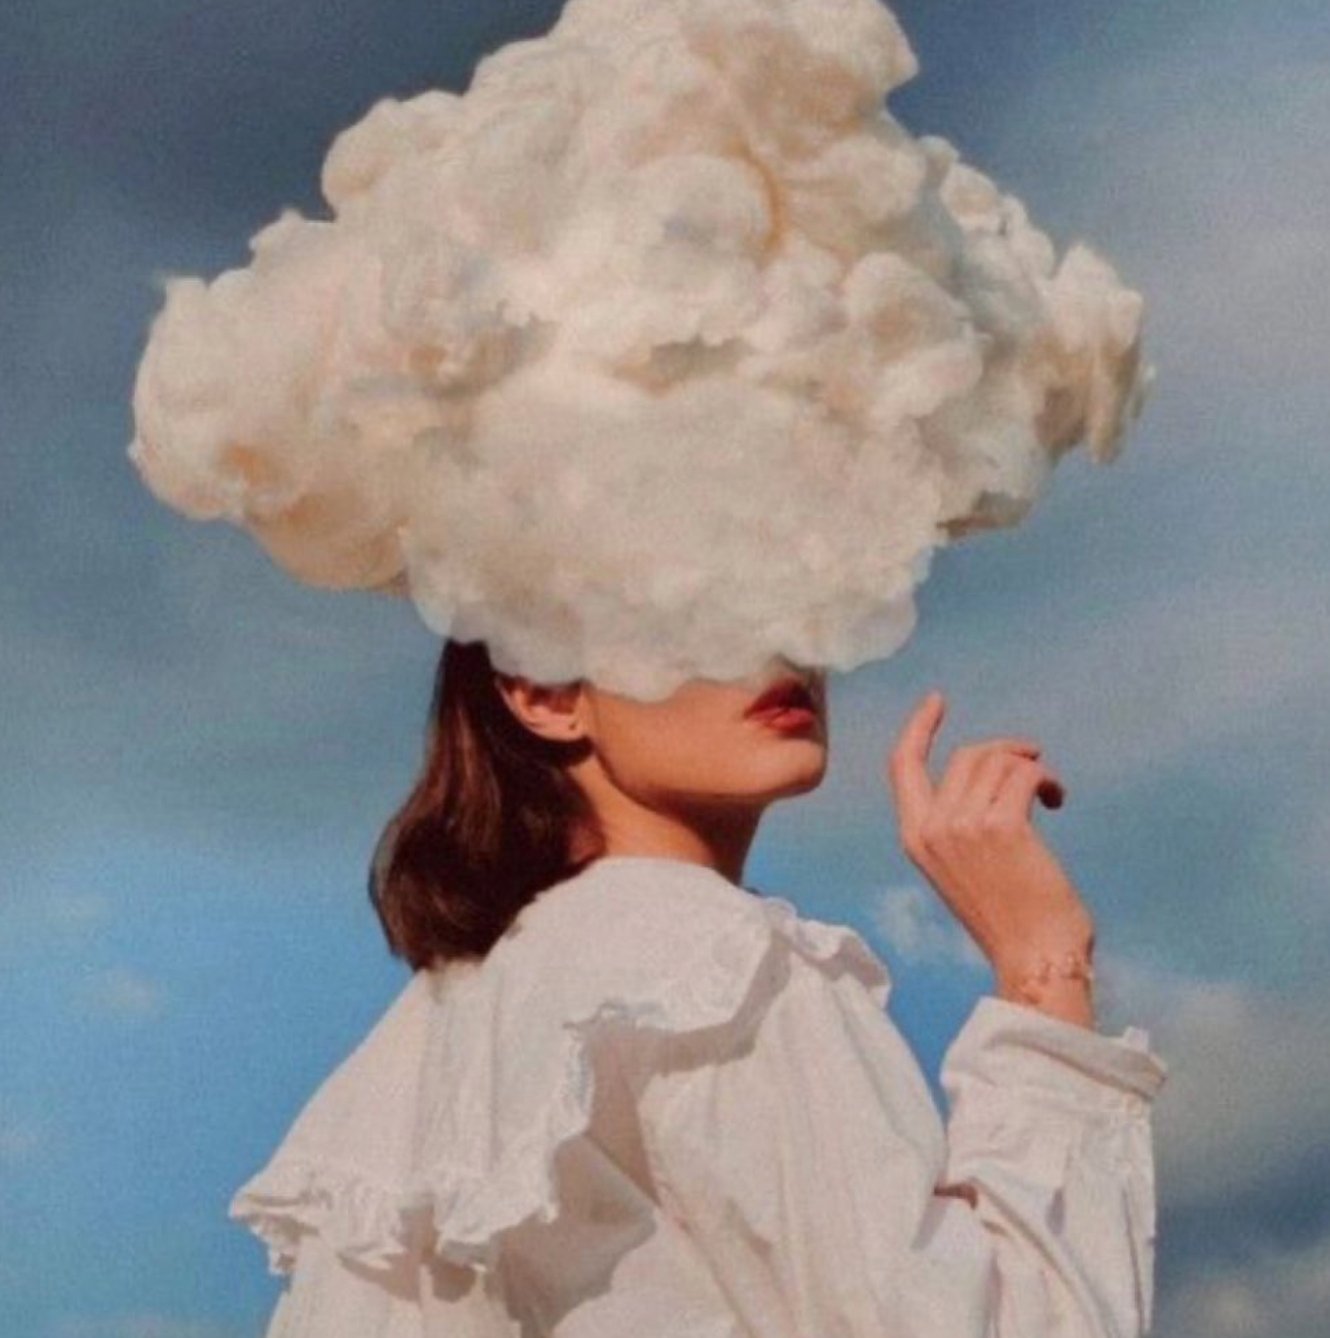 A surreal image of a person with a large, fluffy cloud obscuring their head against a blue sky, evoking a dreamlike or contemplative mood. The individual is dressed in a white, ruffled blouse, enhancing the ethereal aesthetic.